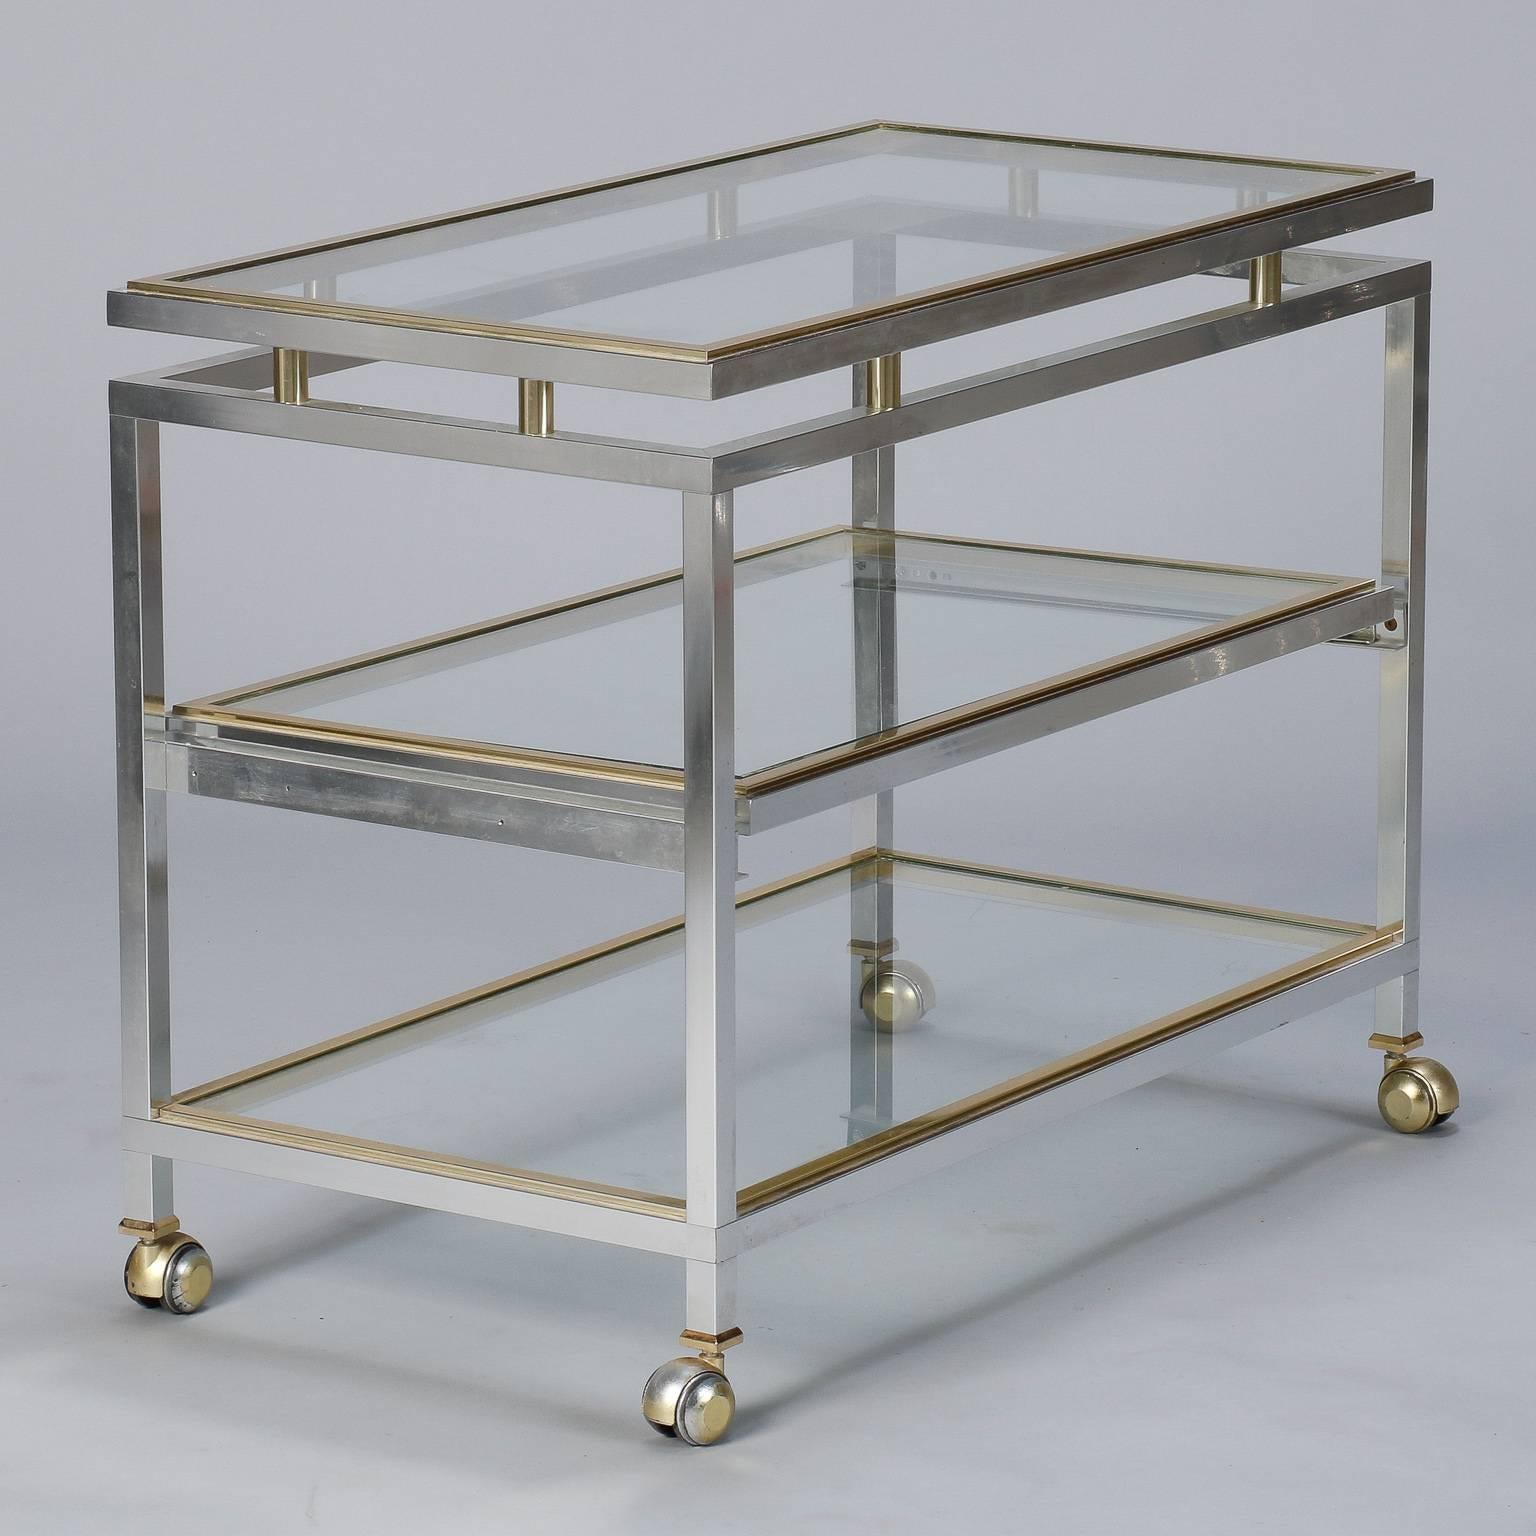 Found in France, this circa 1970s serving cart / trolley has a brushed chrome frame with contrasting brass trim and clear glass shelves. Middle shelf slides out. Style similar to pieces designed at the time by Maison Jansen but no manufacturer’s